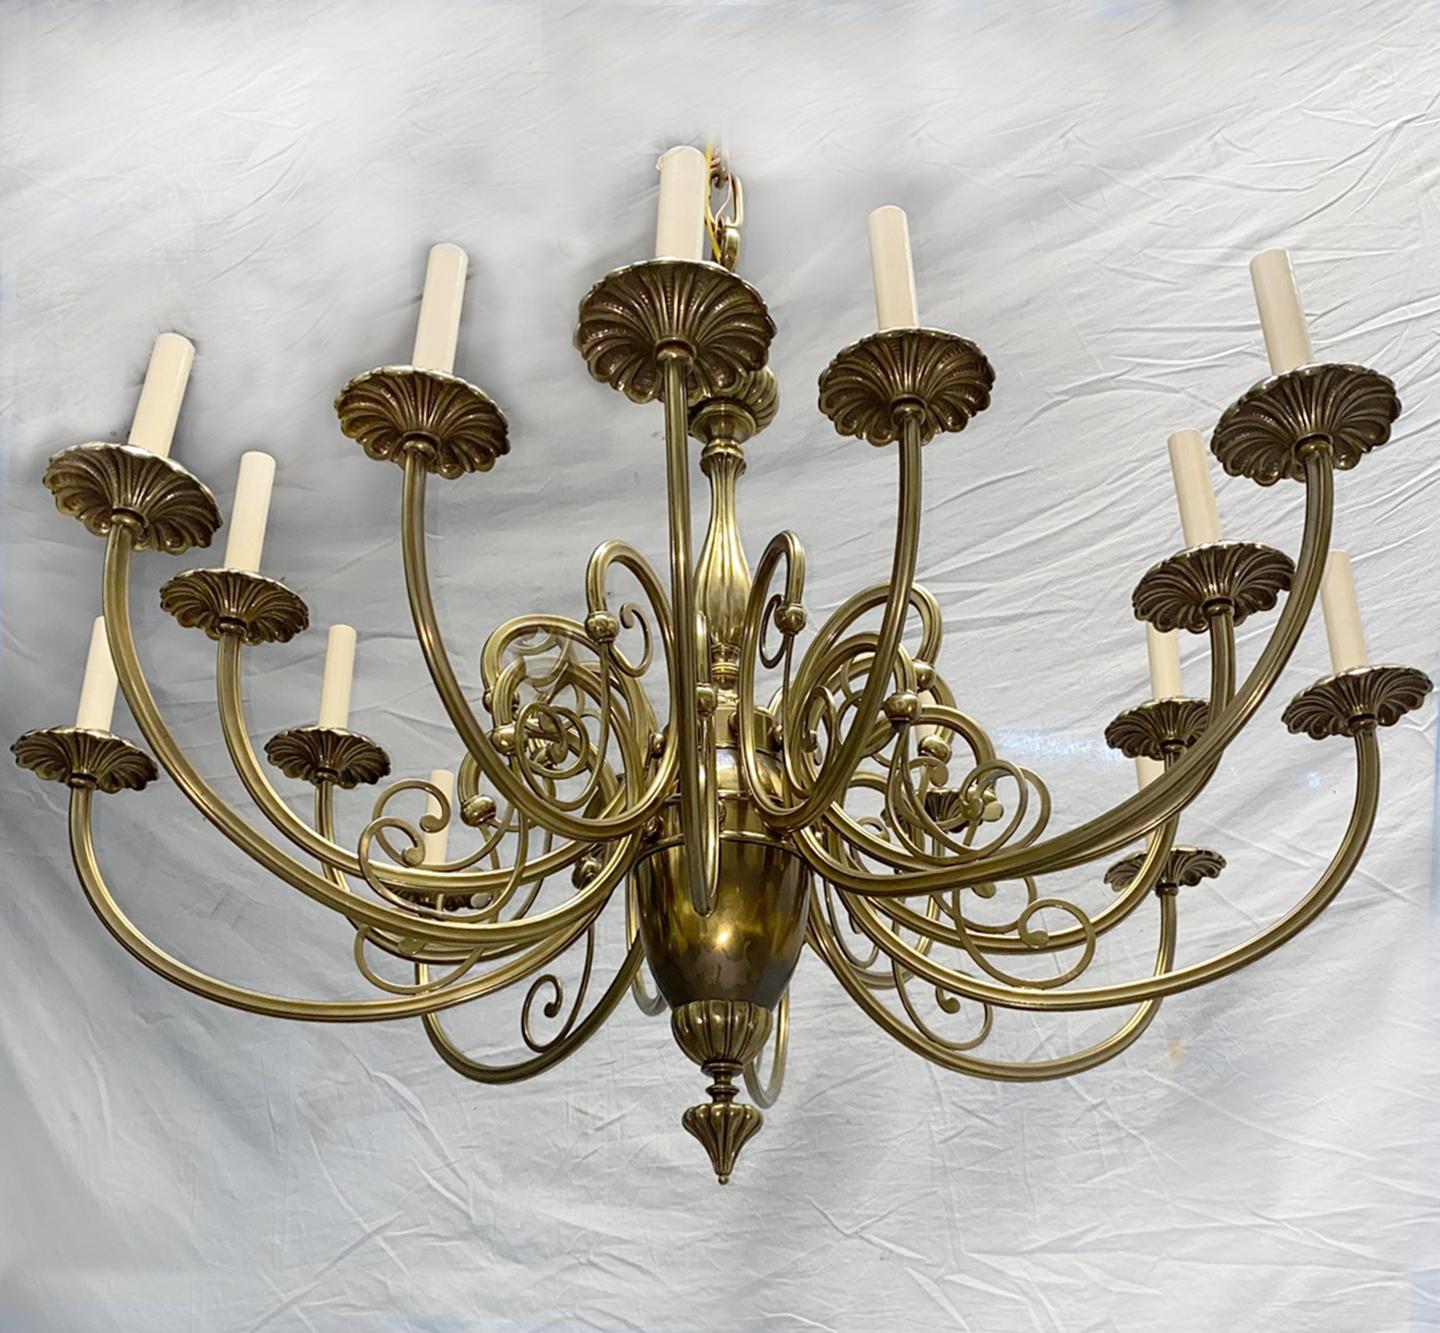 A circa 1950's French gilt bronze neoclassic style chandelier with scrolling arms and 16 lights.

Measurements:
Drop: 31